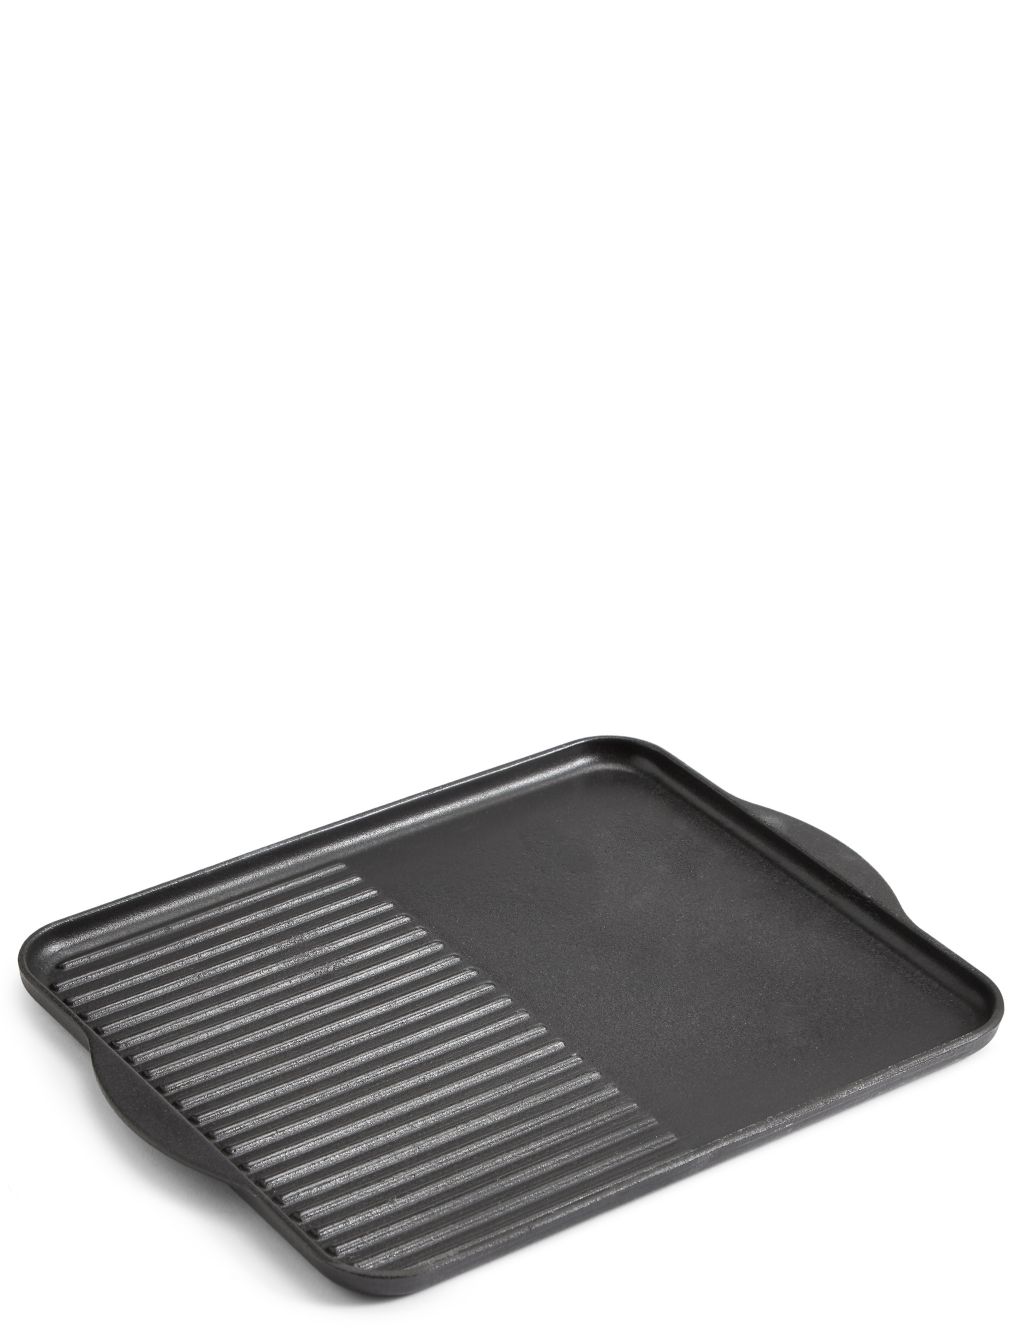 Cast Iron Grilling Pan 1 of 3